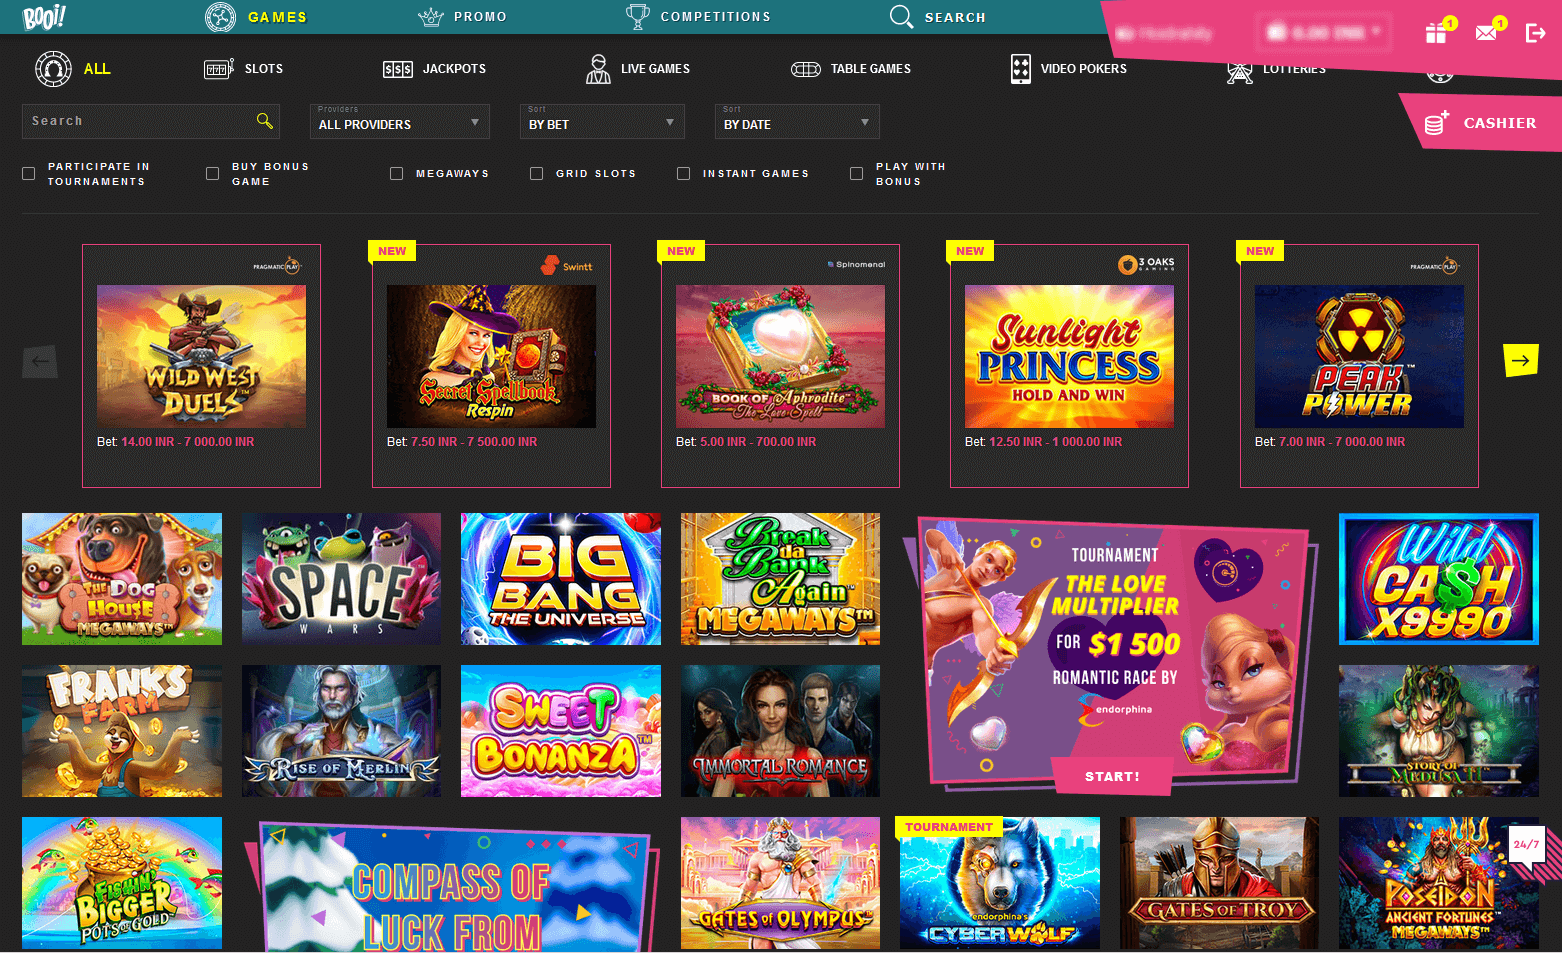 Choose a Booi casino game you are interested in from a large list